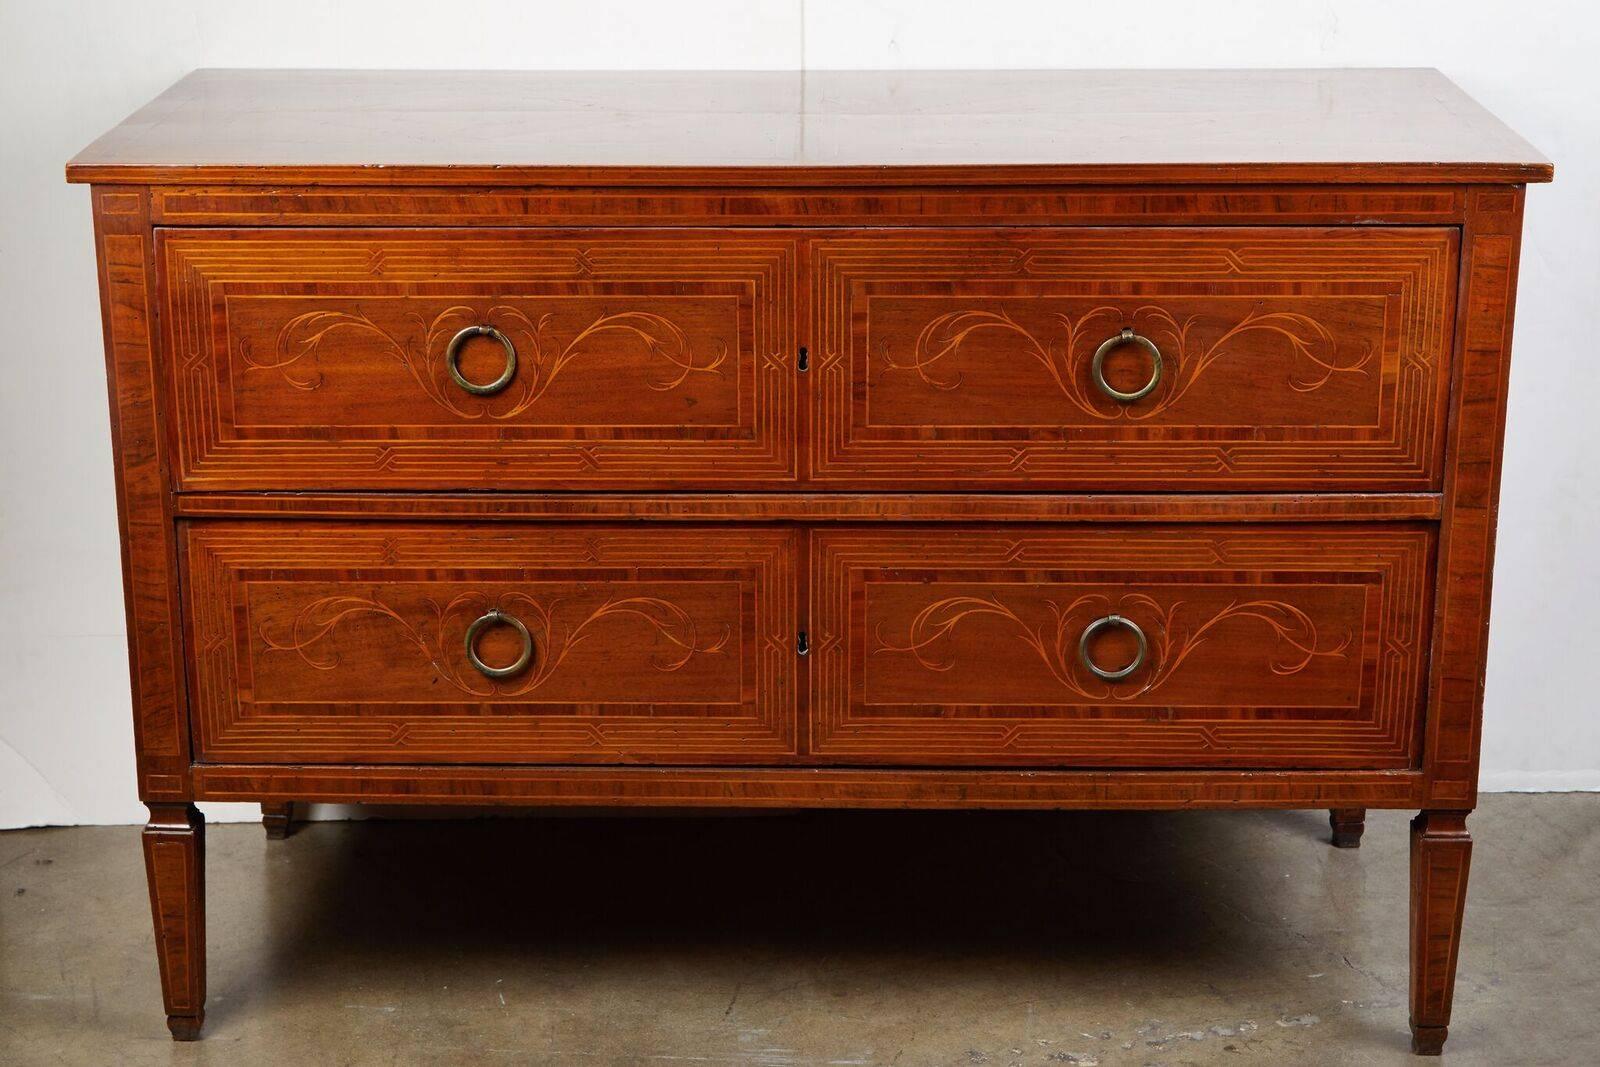 Streamlined, elegant, circa 1860, Northern Italian, two-drawer walnut commode with very fine, fruitwood inlay featuring both geometric faux paneling and organic motifs throughout. The whole on tapered legs.